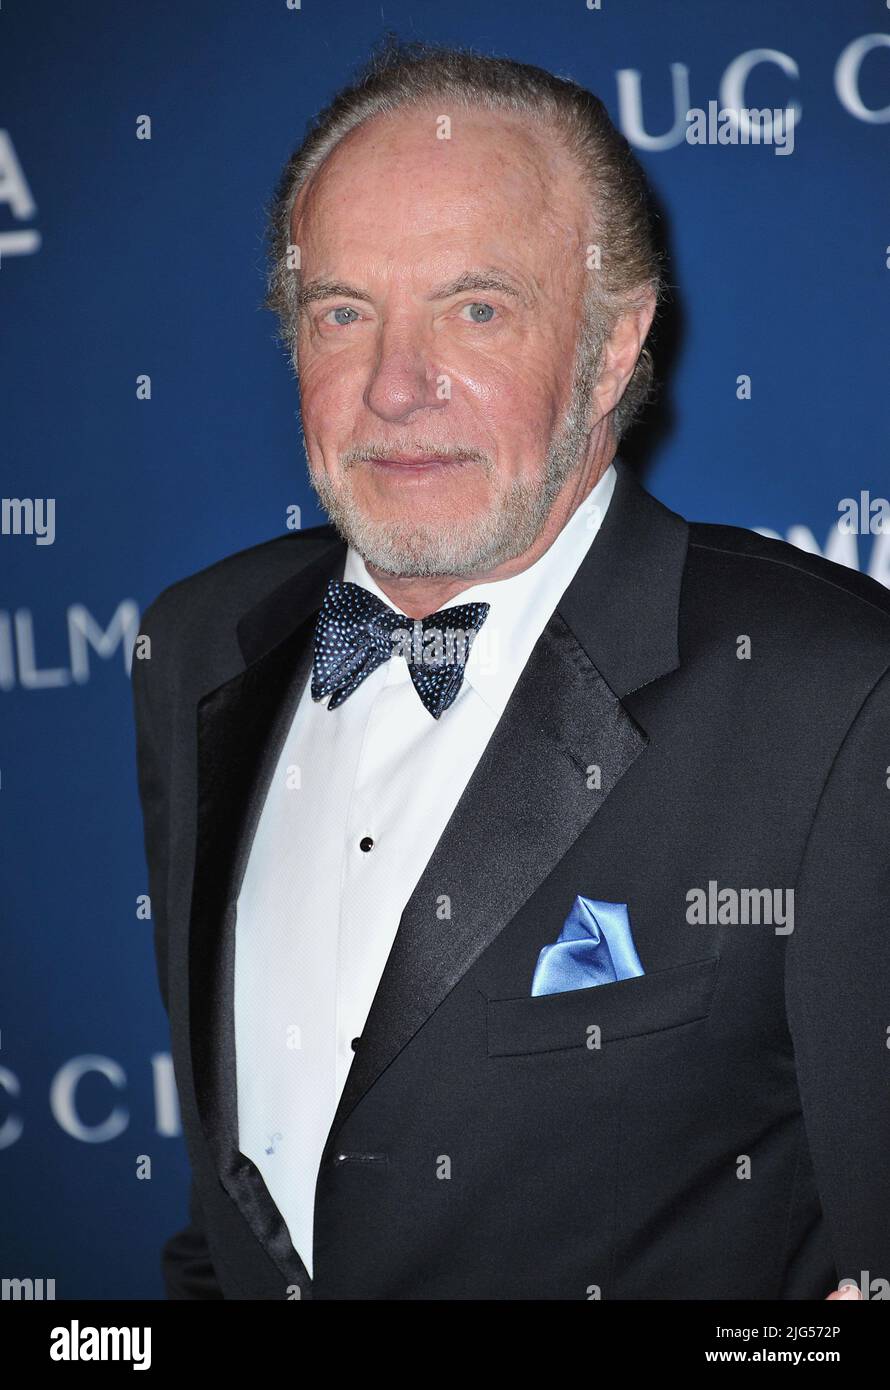 James Caan  arriving at LACMA Art + Film Gala 2013 at the LACMA Museum in Los Angeles. Stock Photo